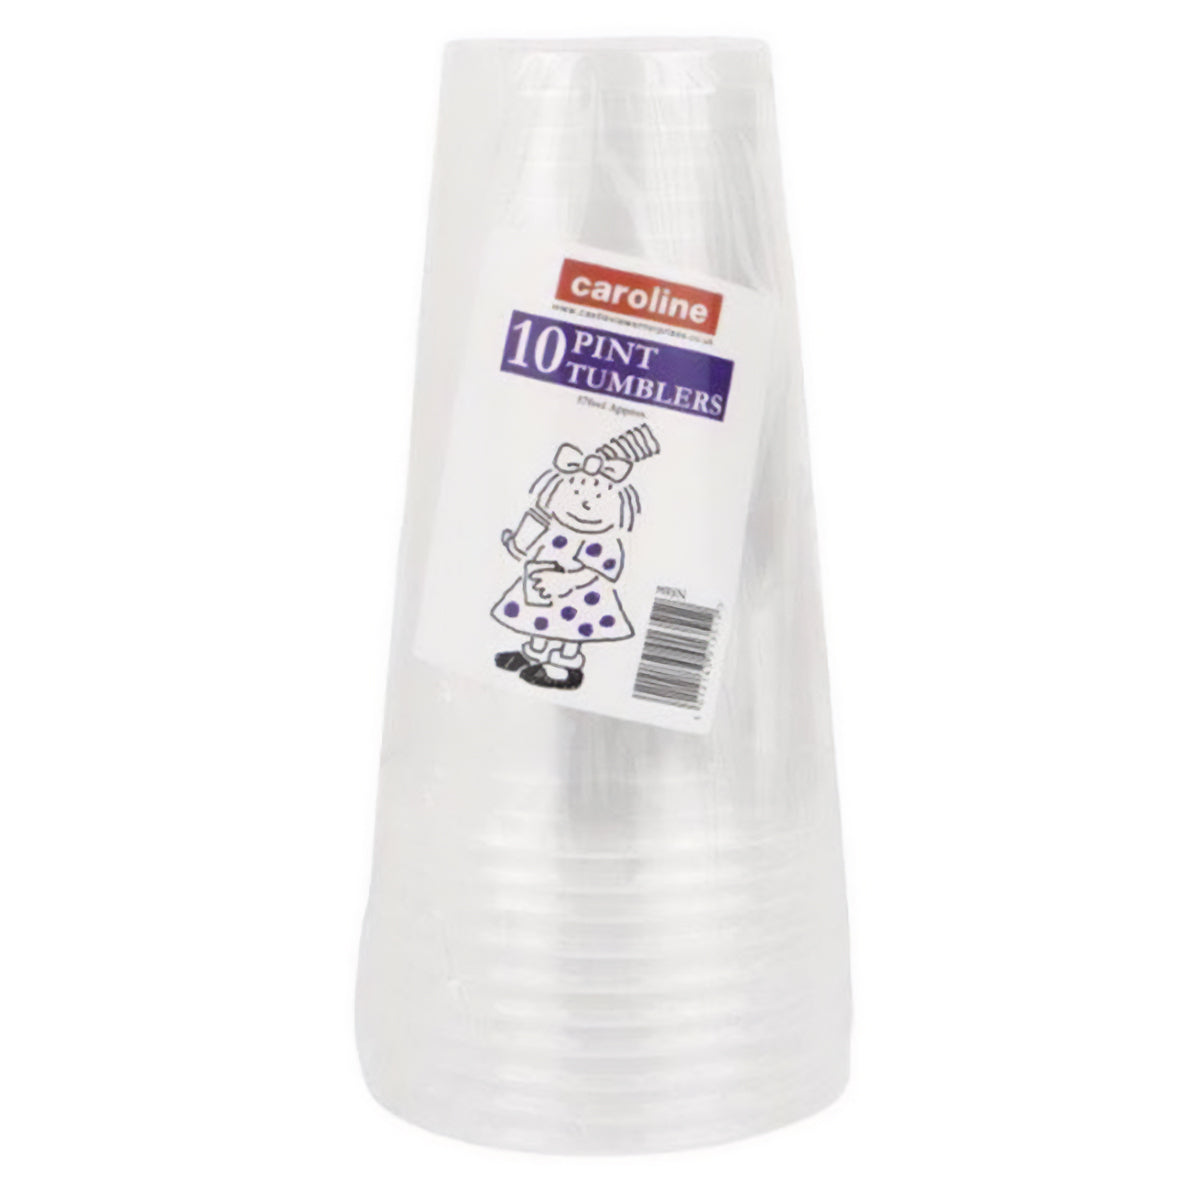 Caroline - Disposable Pint Tumblers - 10 Pack - Continental Food Store